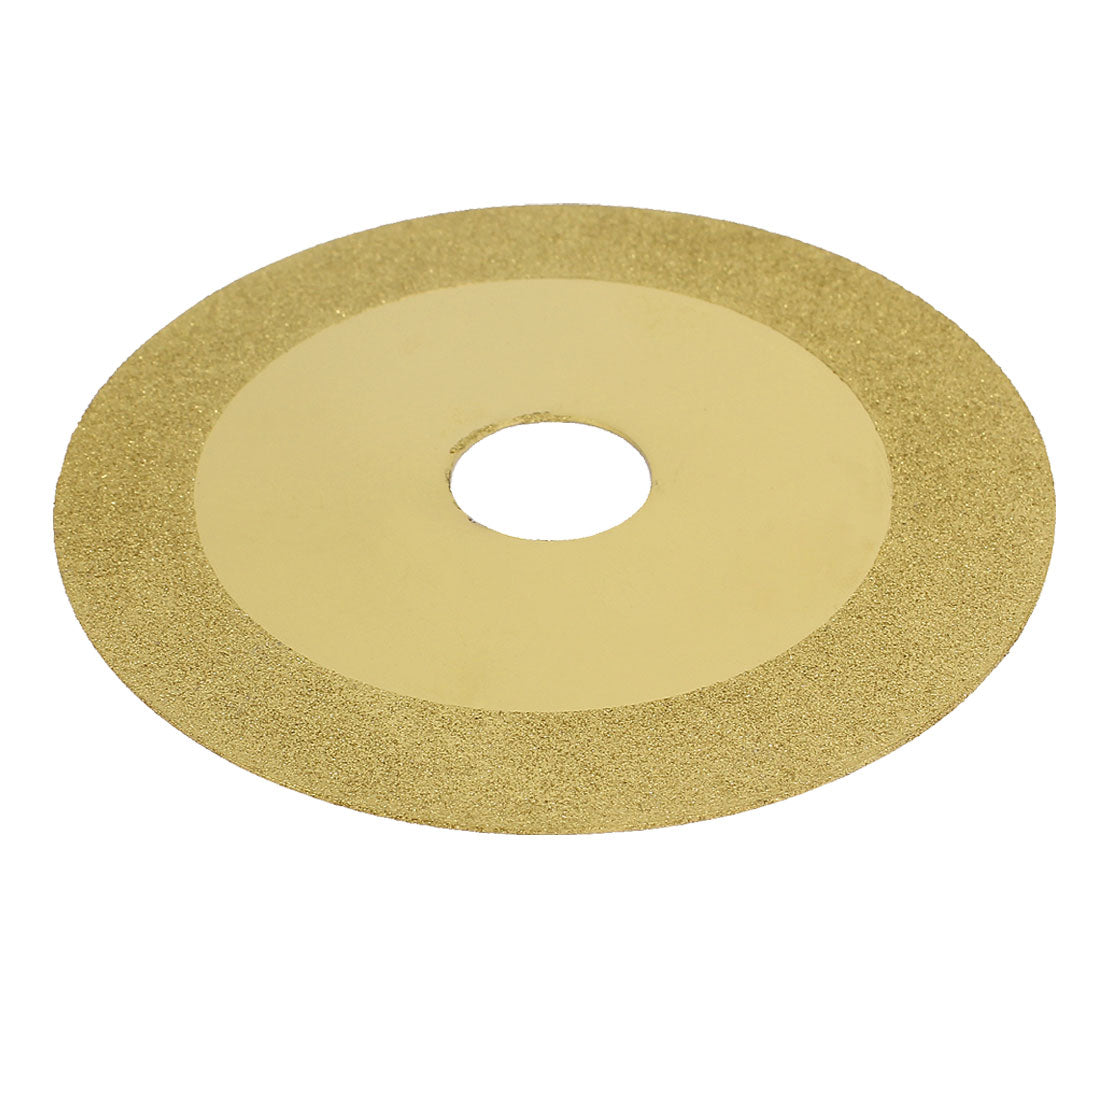 uxcell Uxcell 4" x 0.8" Glass Tile Diamond Coated Grinding Ceramic Cutting Wheel Disc Gold Tone